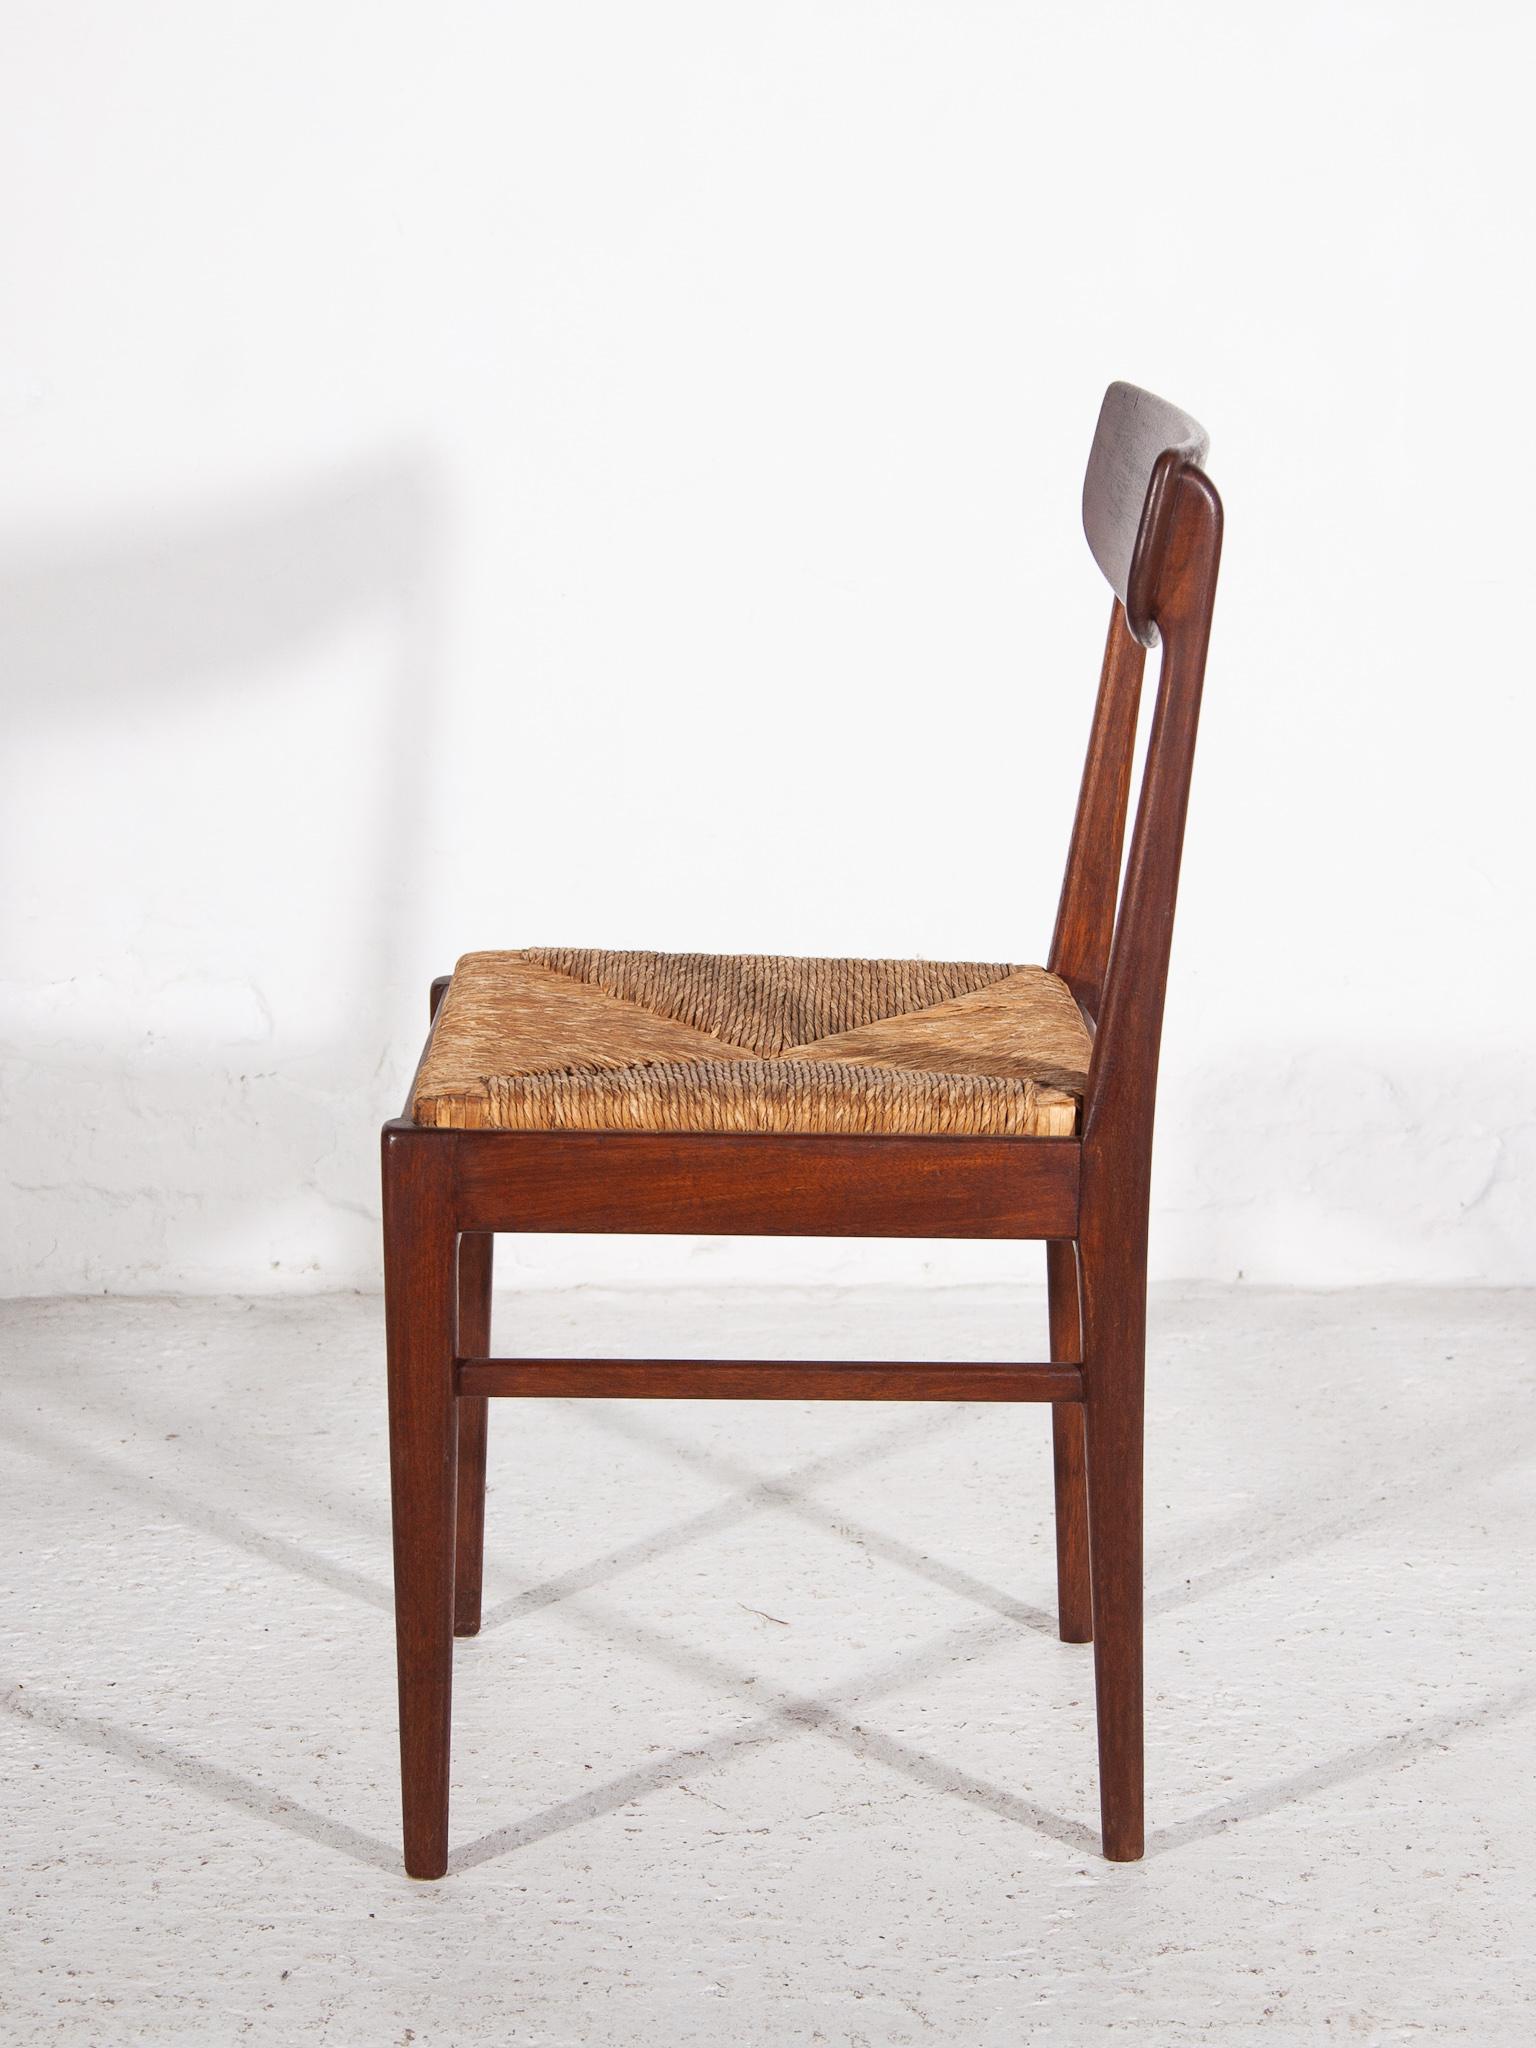 Mid-20th Century Teak Dining Chairs with Rattan Sea, t 1959, Belgium For Sale